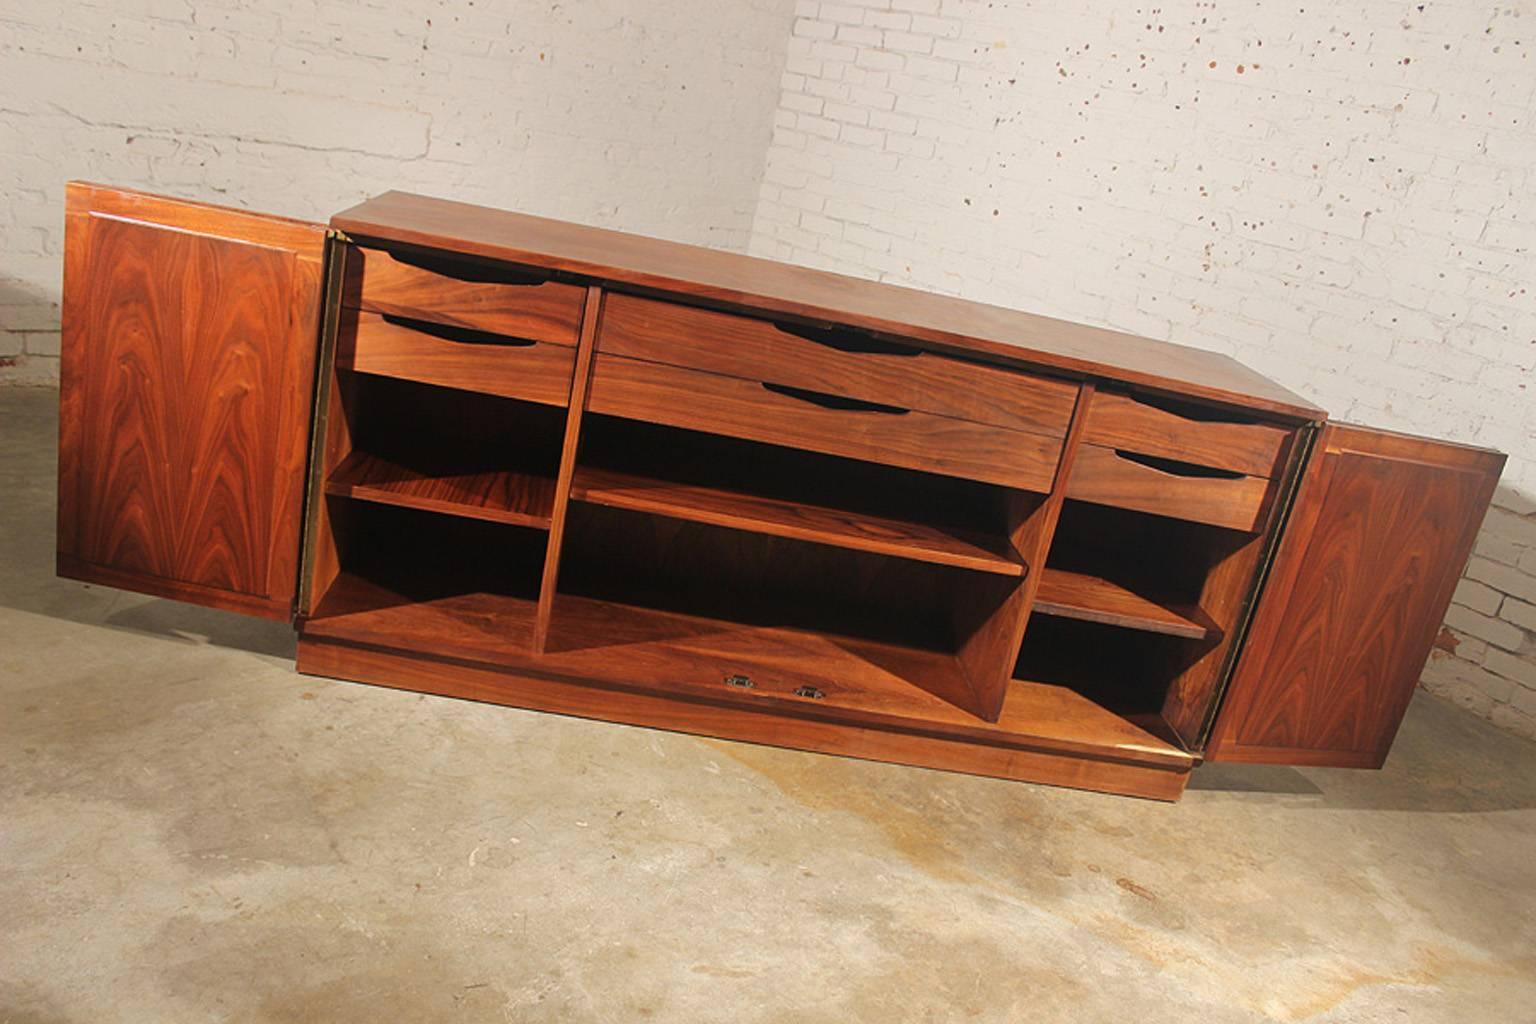 Veneer Honduran Rosewood Bookmatched Cabinet by Jack Cartwright for Founders Furniture